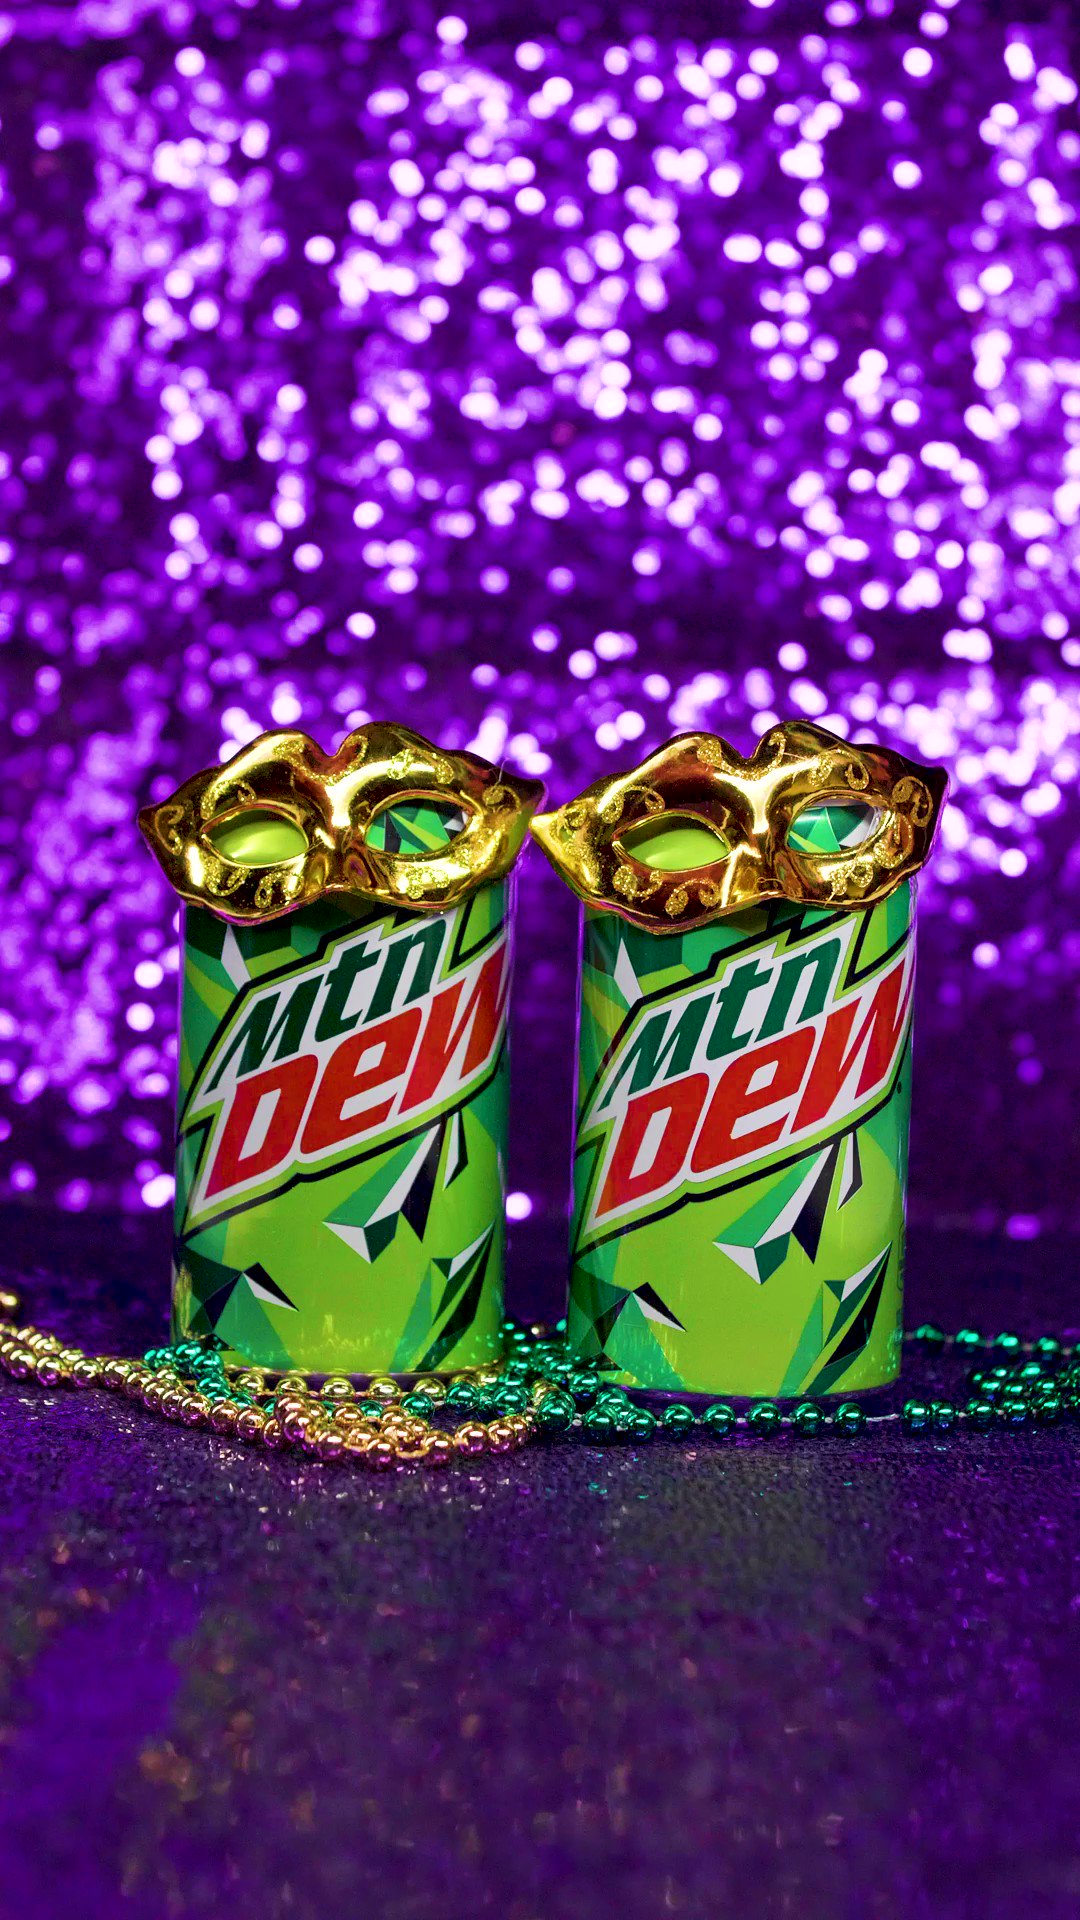 Get Your Fix  Mountain Dew  3D and CG  Abstract Background Wallpapers on  Desktop Nexus Image 134310